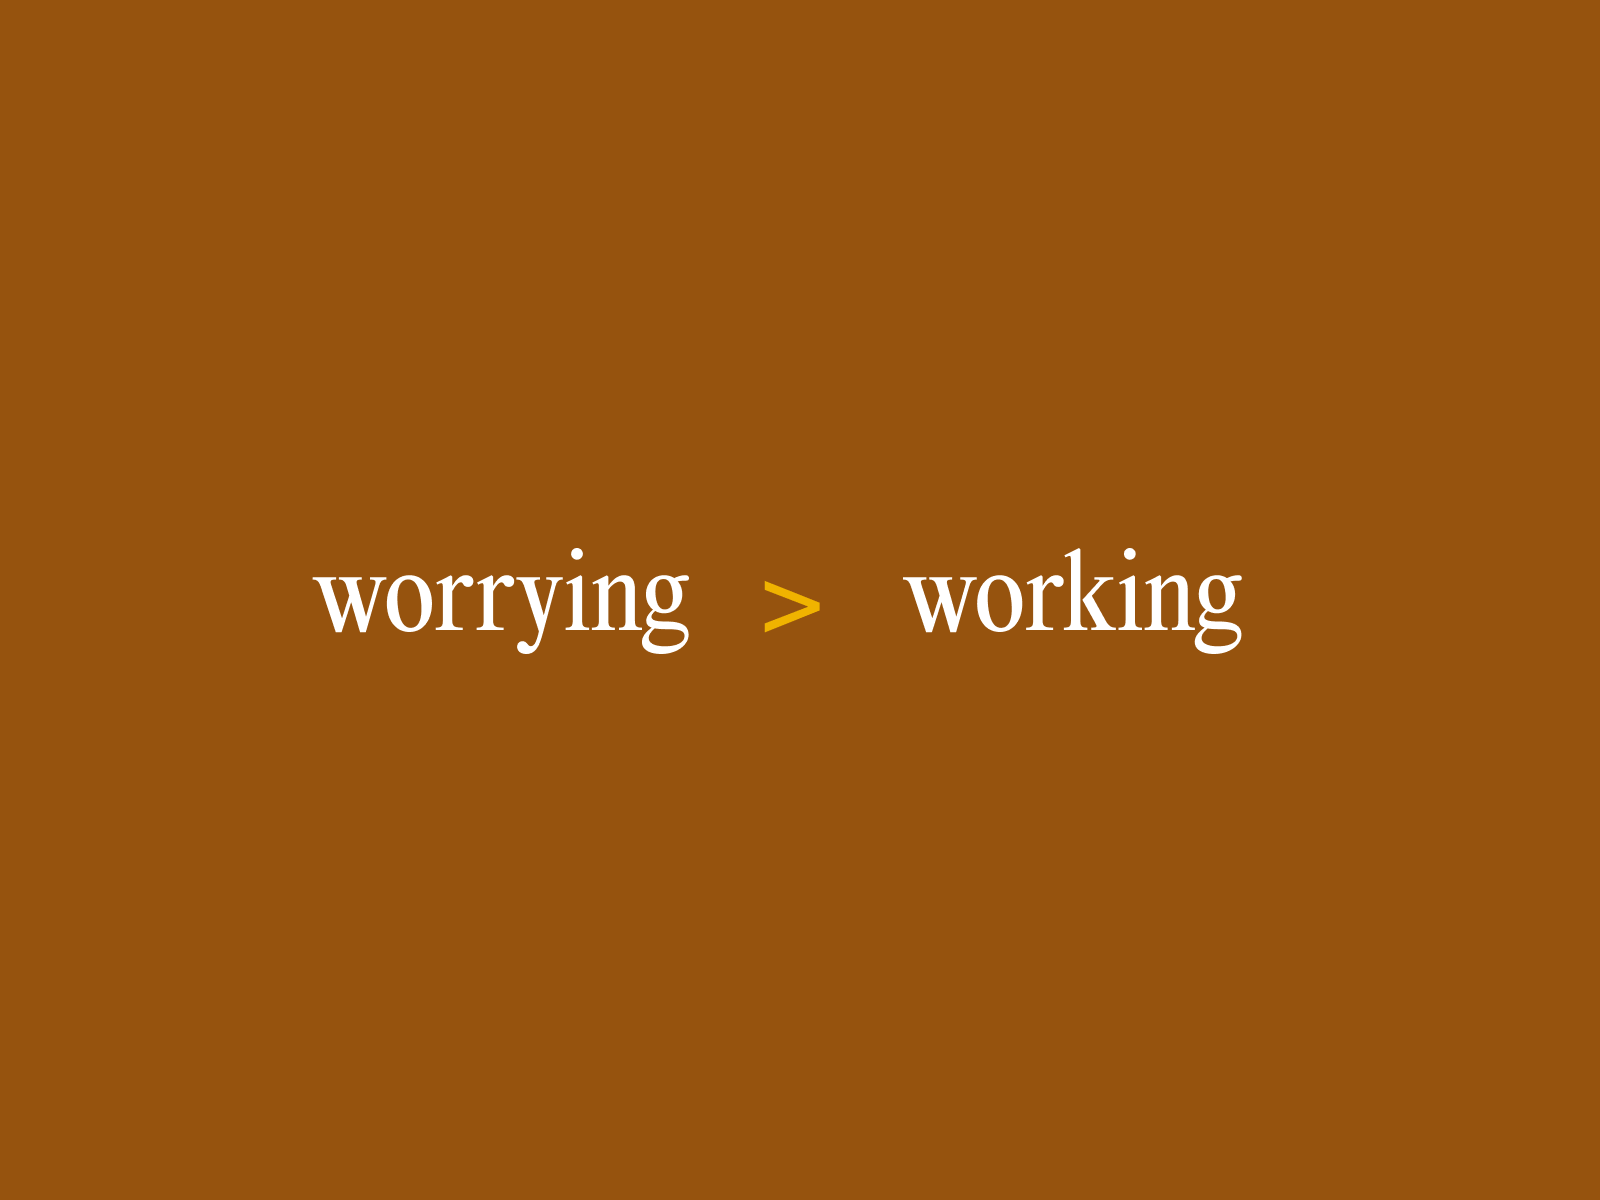 Worrying is greater than working